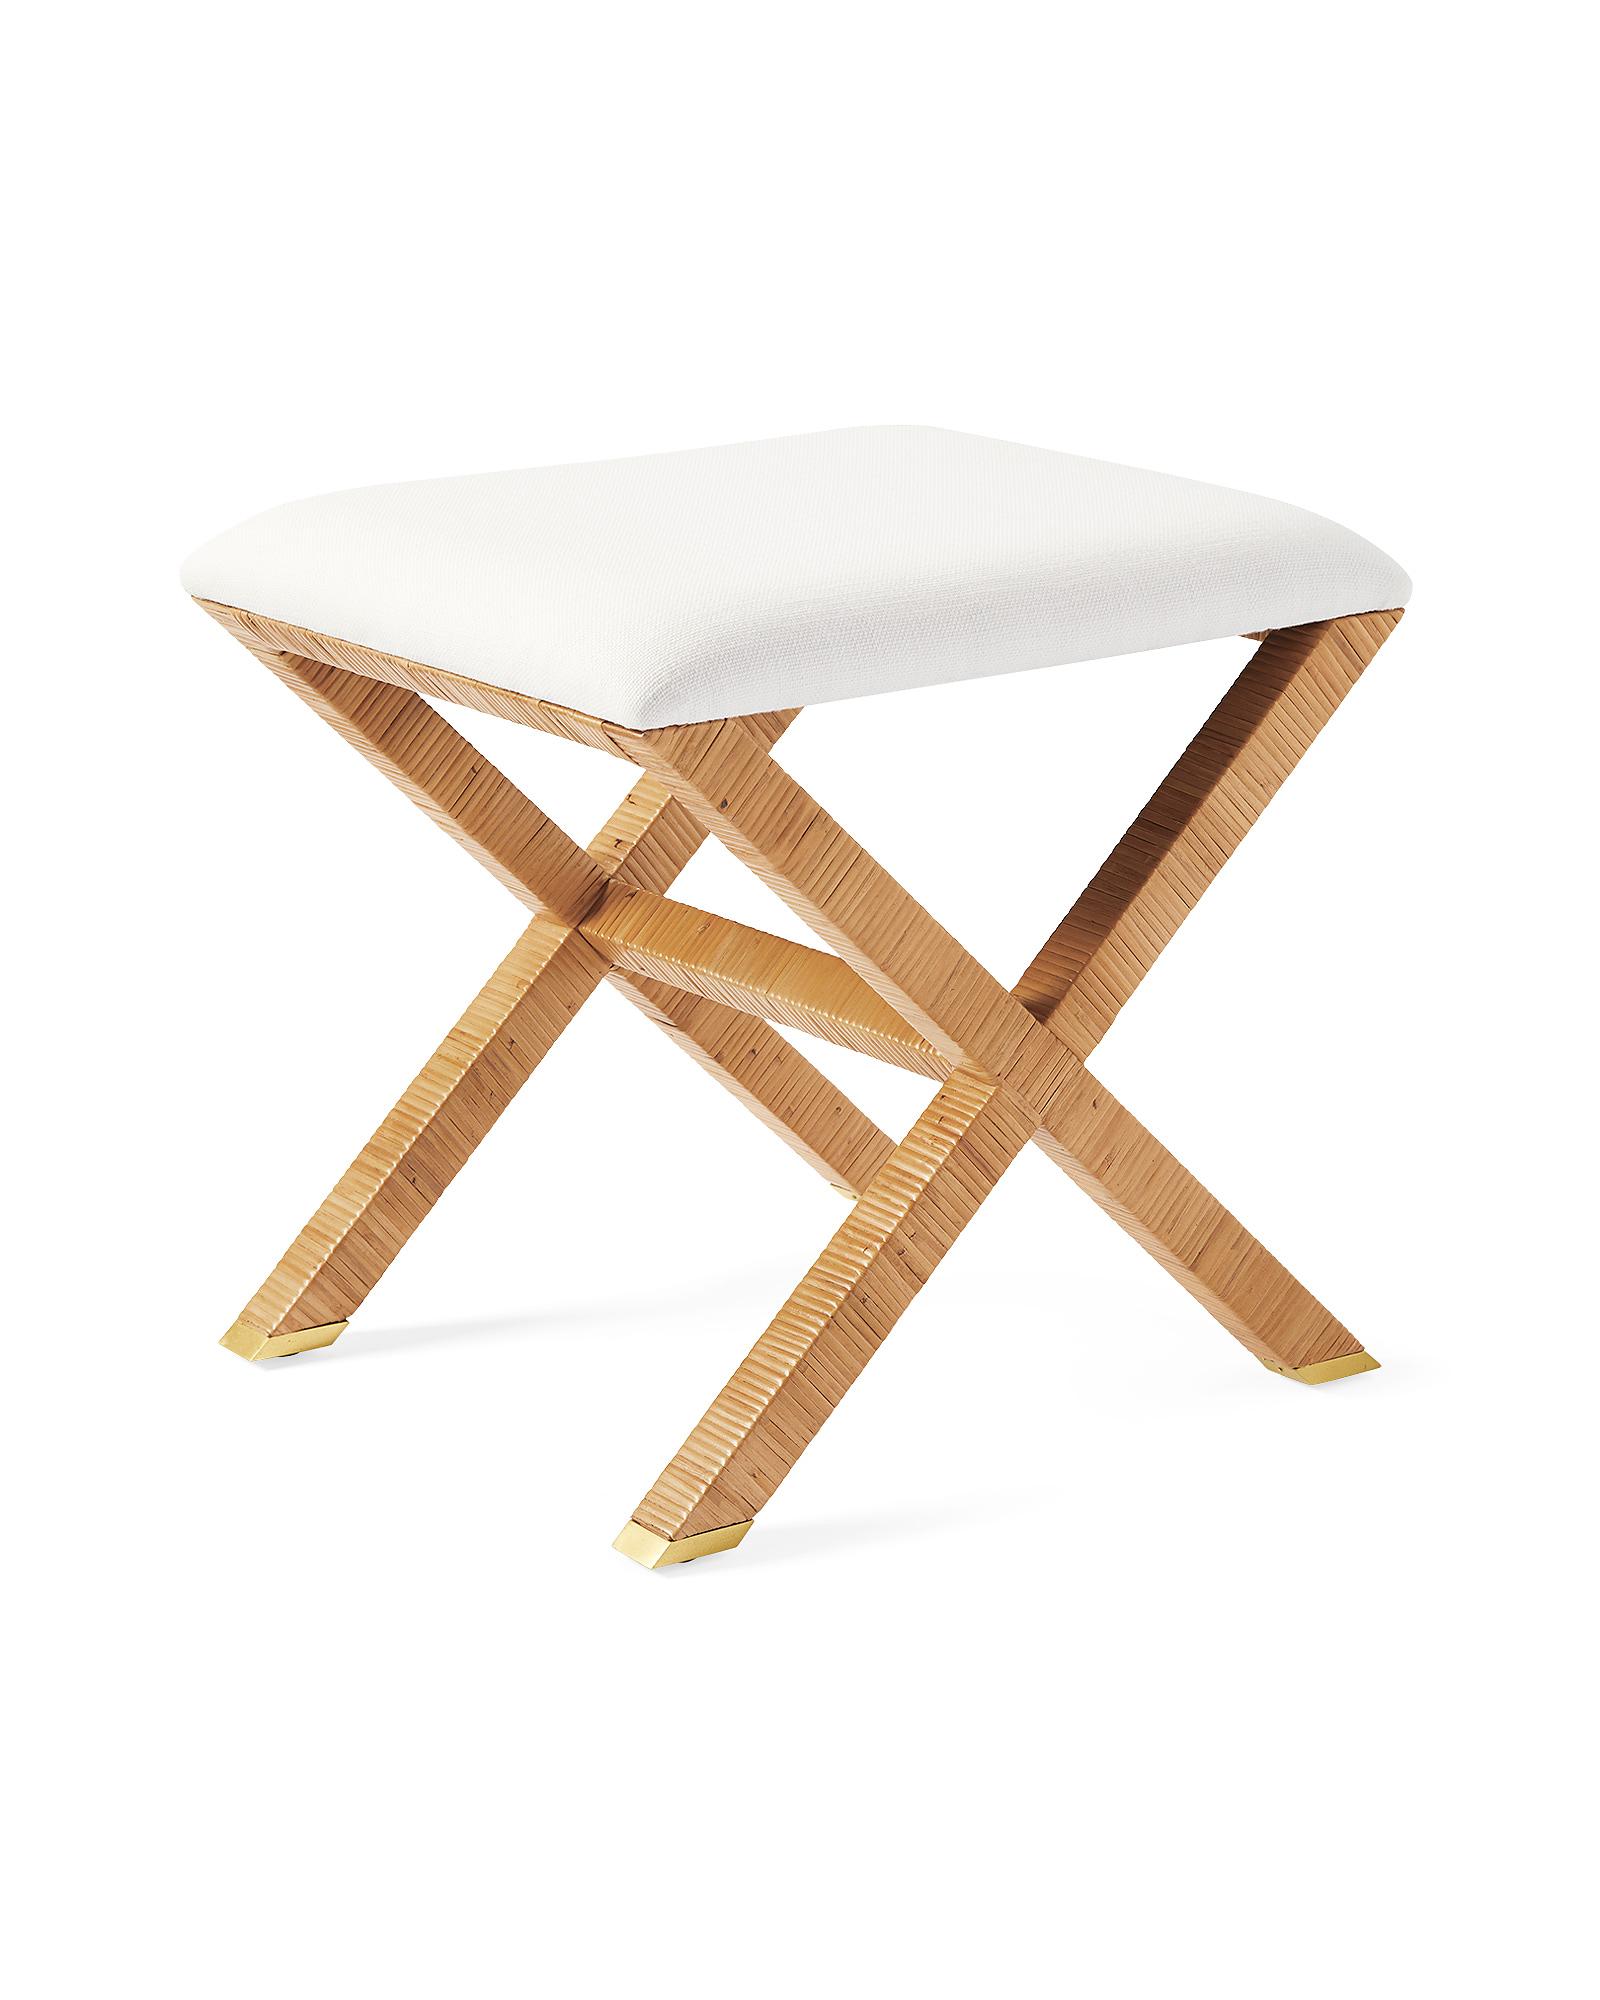 Shop Balboa Rattan X-Base stool from Serena & Lily on Openhaus